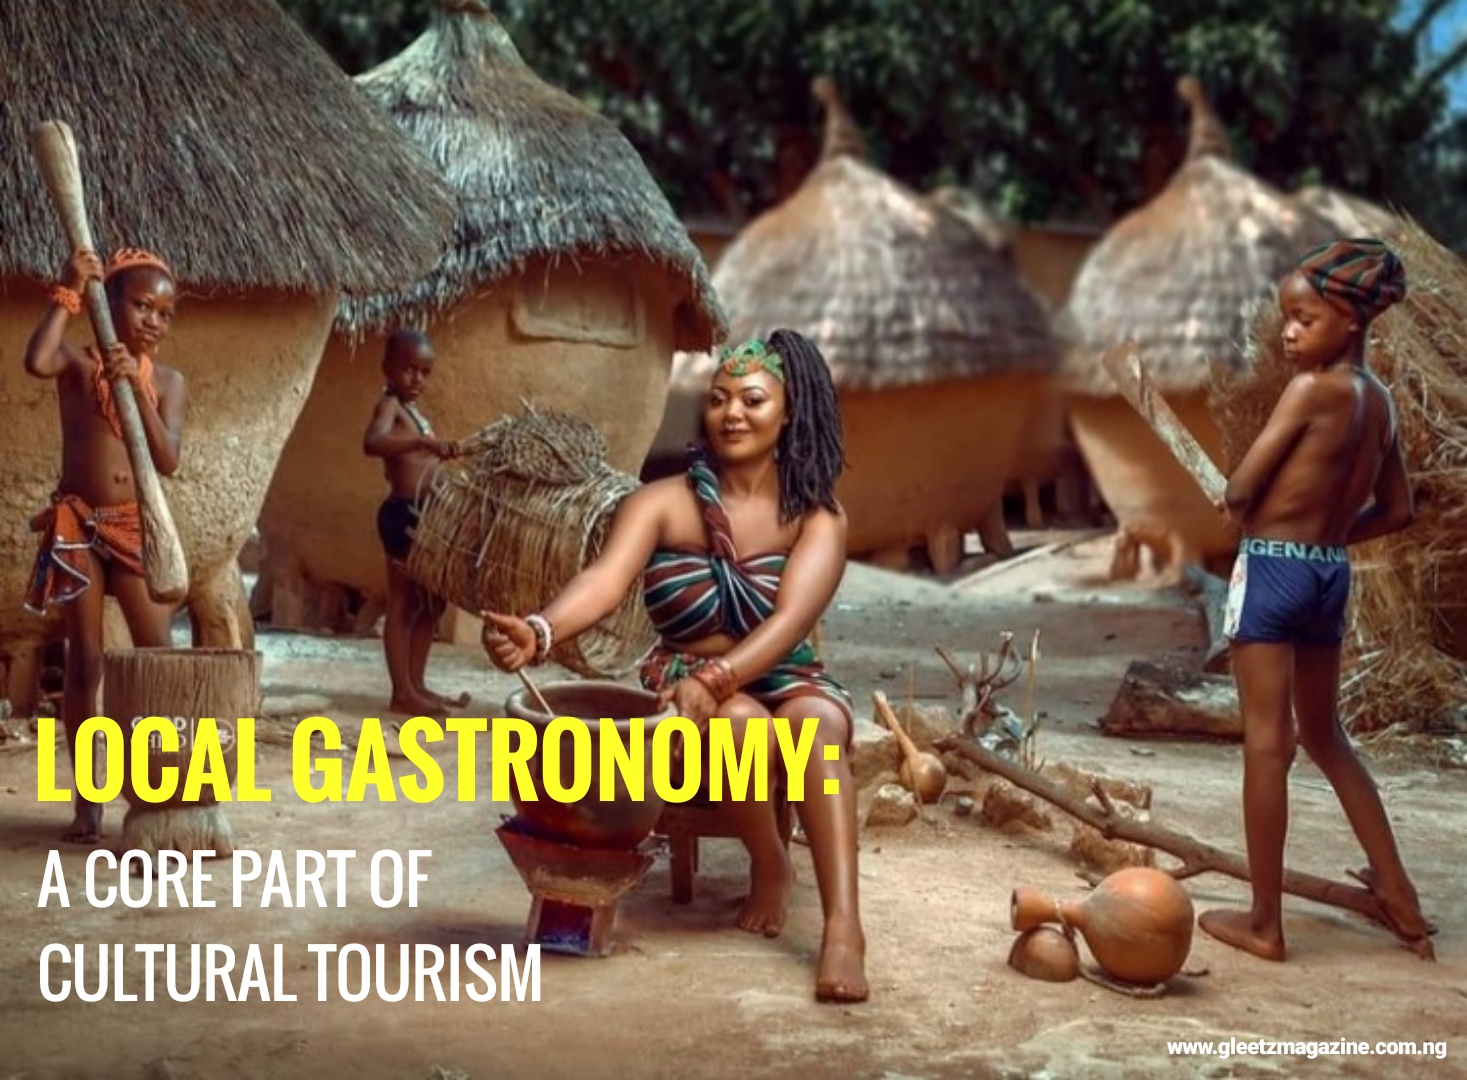 Local Gastronomy: A core part of Cultural Tourism